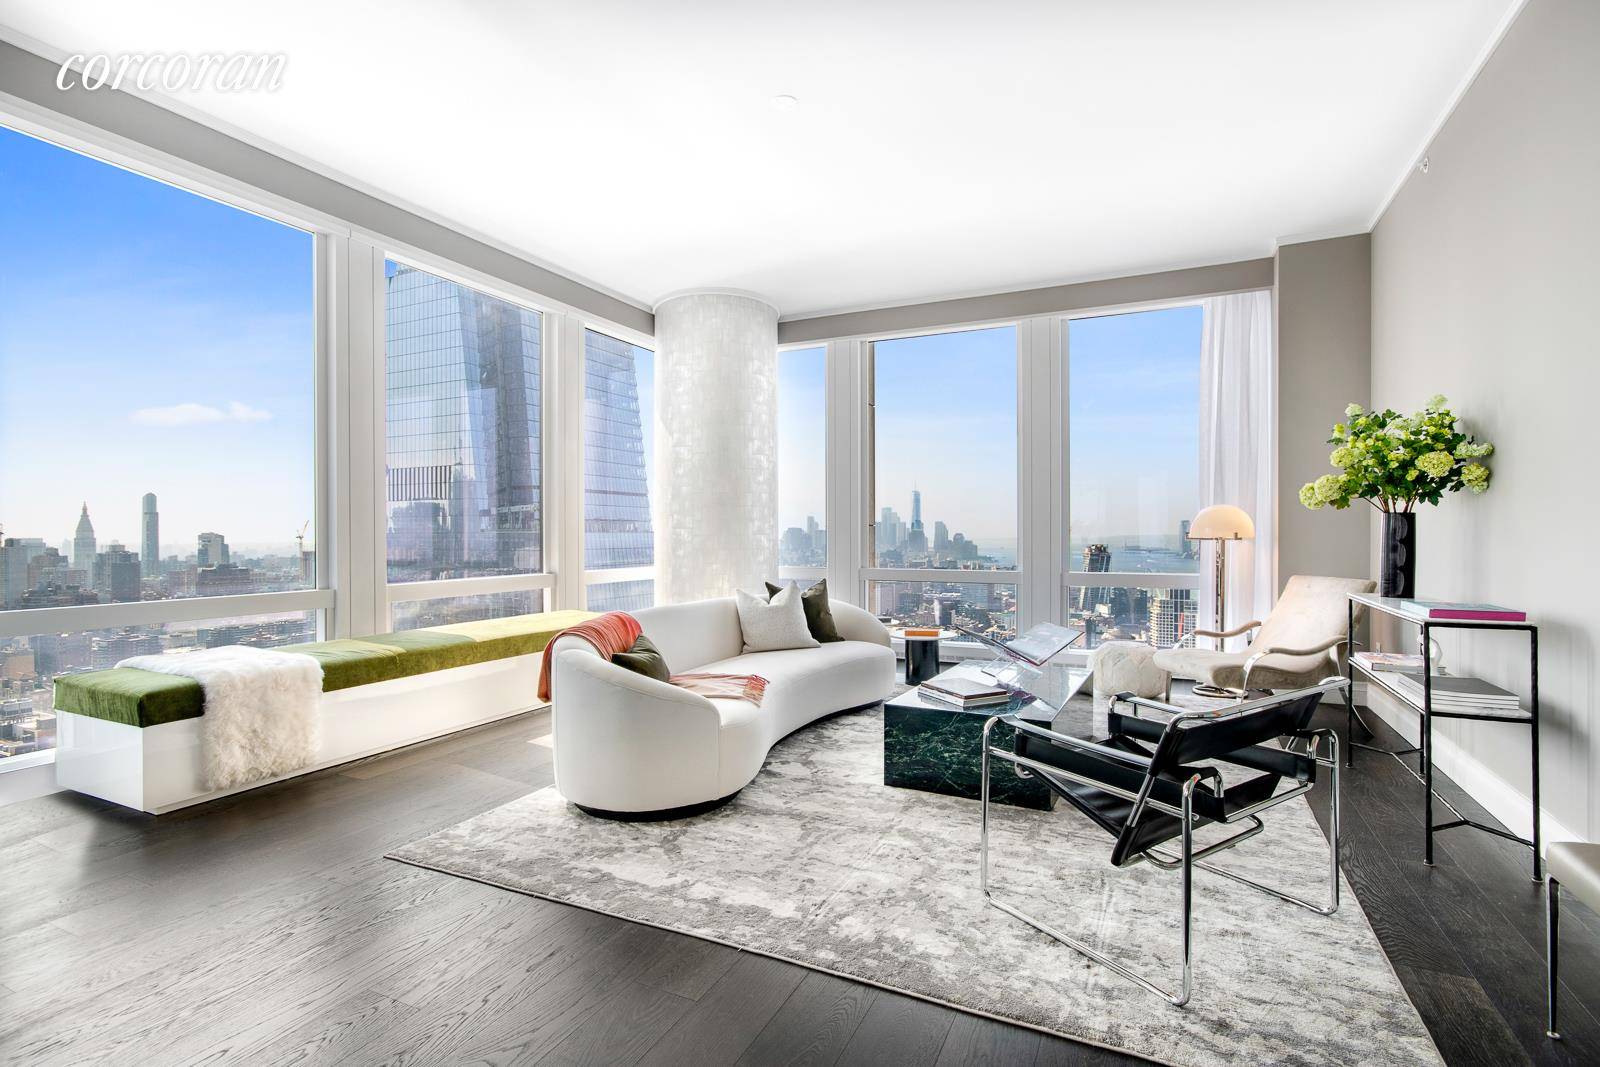 LIVE WHERE IT ALL COMES TOGETHER35 Hudson Yards, the tallest residential building at Hudson Yards, was designed by David Childs SOM featuring a beautiful facade of Bavarian limestone, while the ...